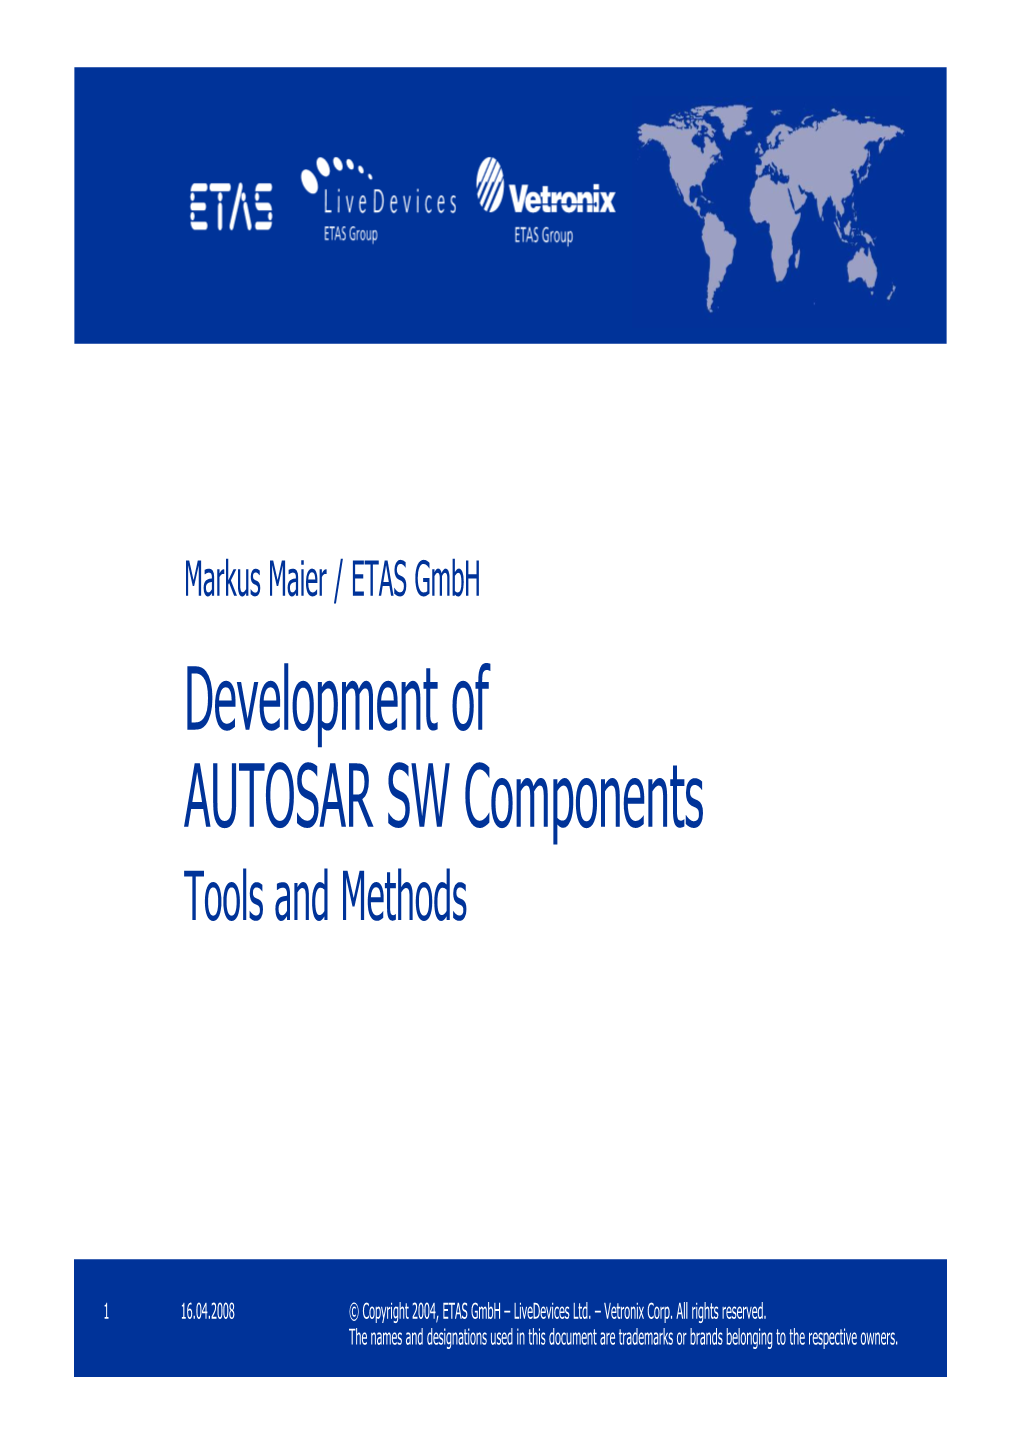 Development of AUTOSAR SW Components Tools and Methods